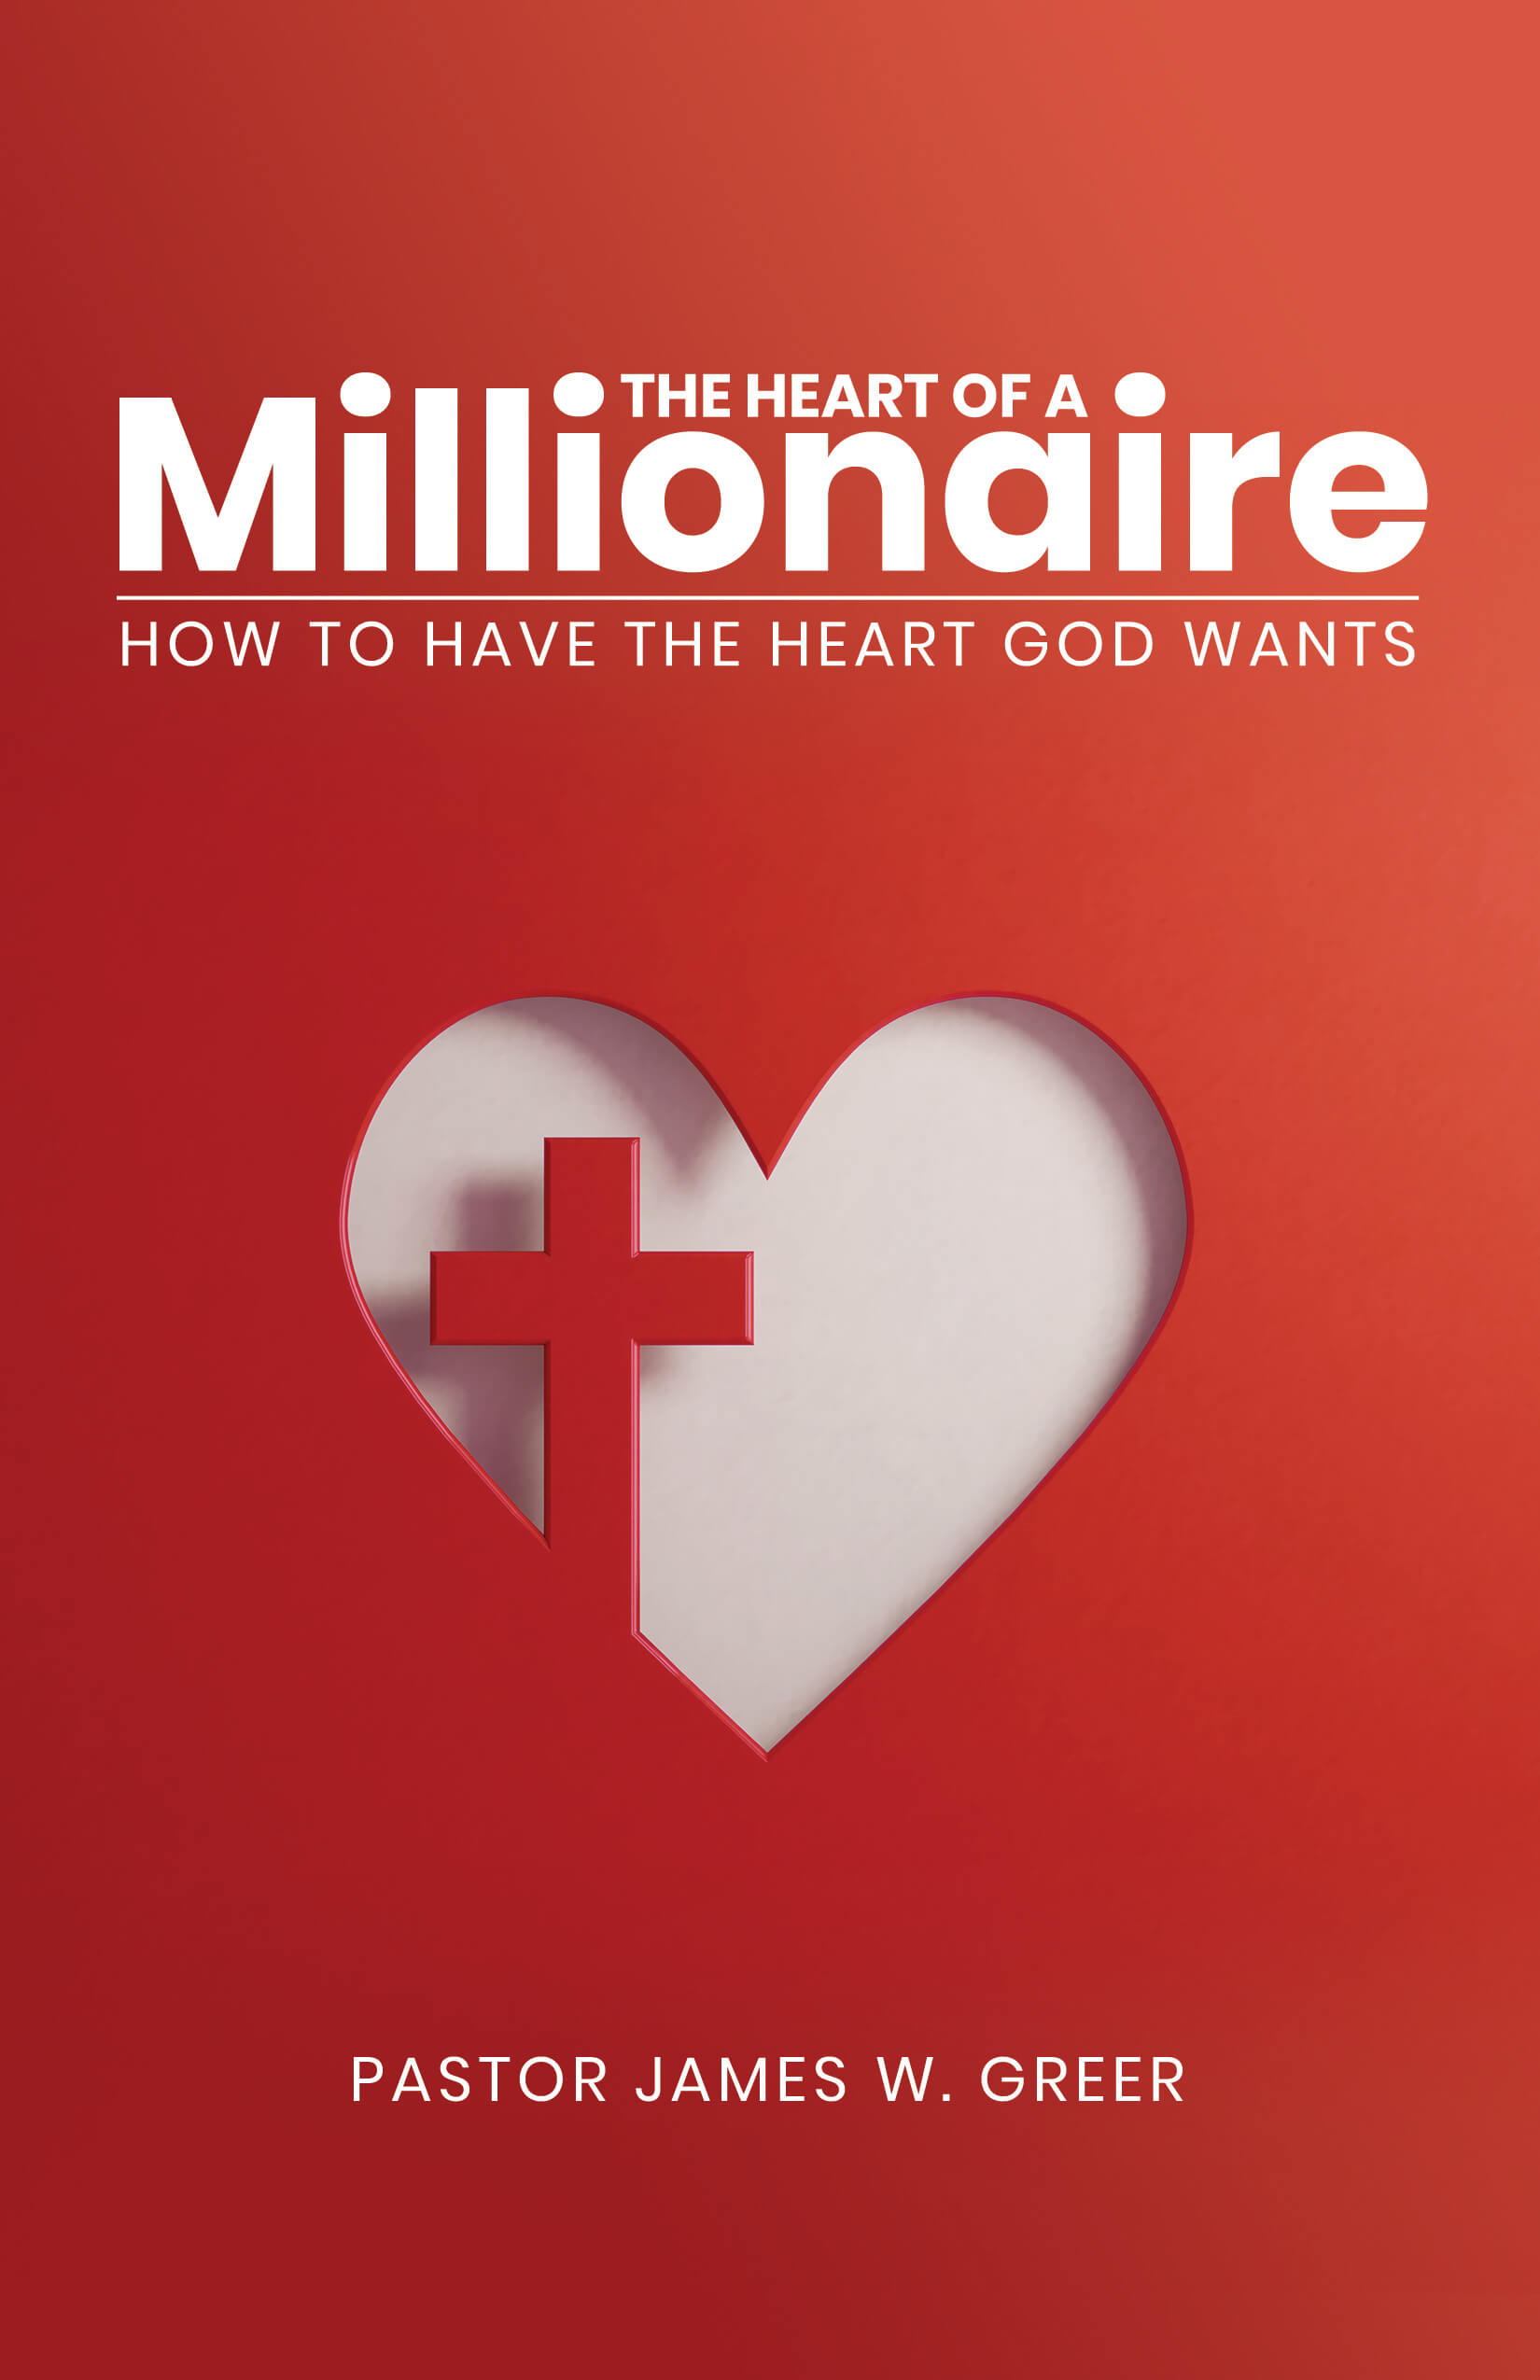 The Heart of a Millionaire